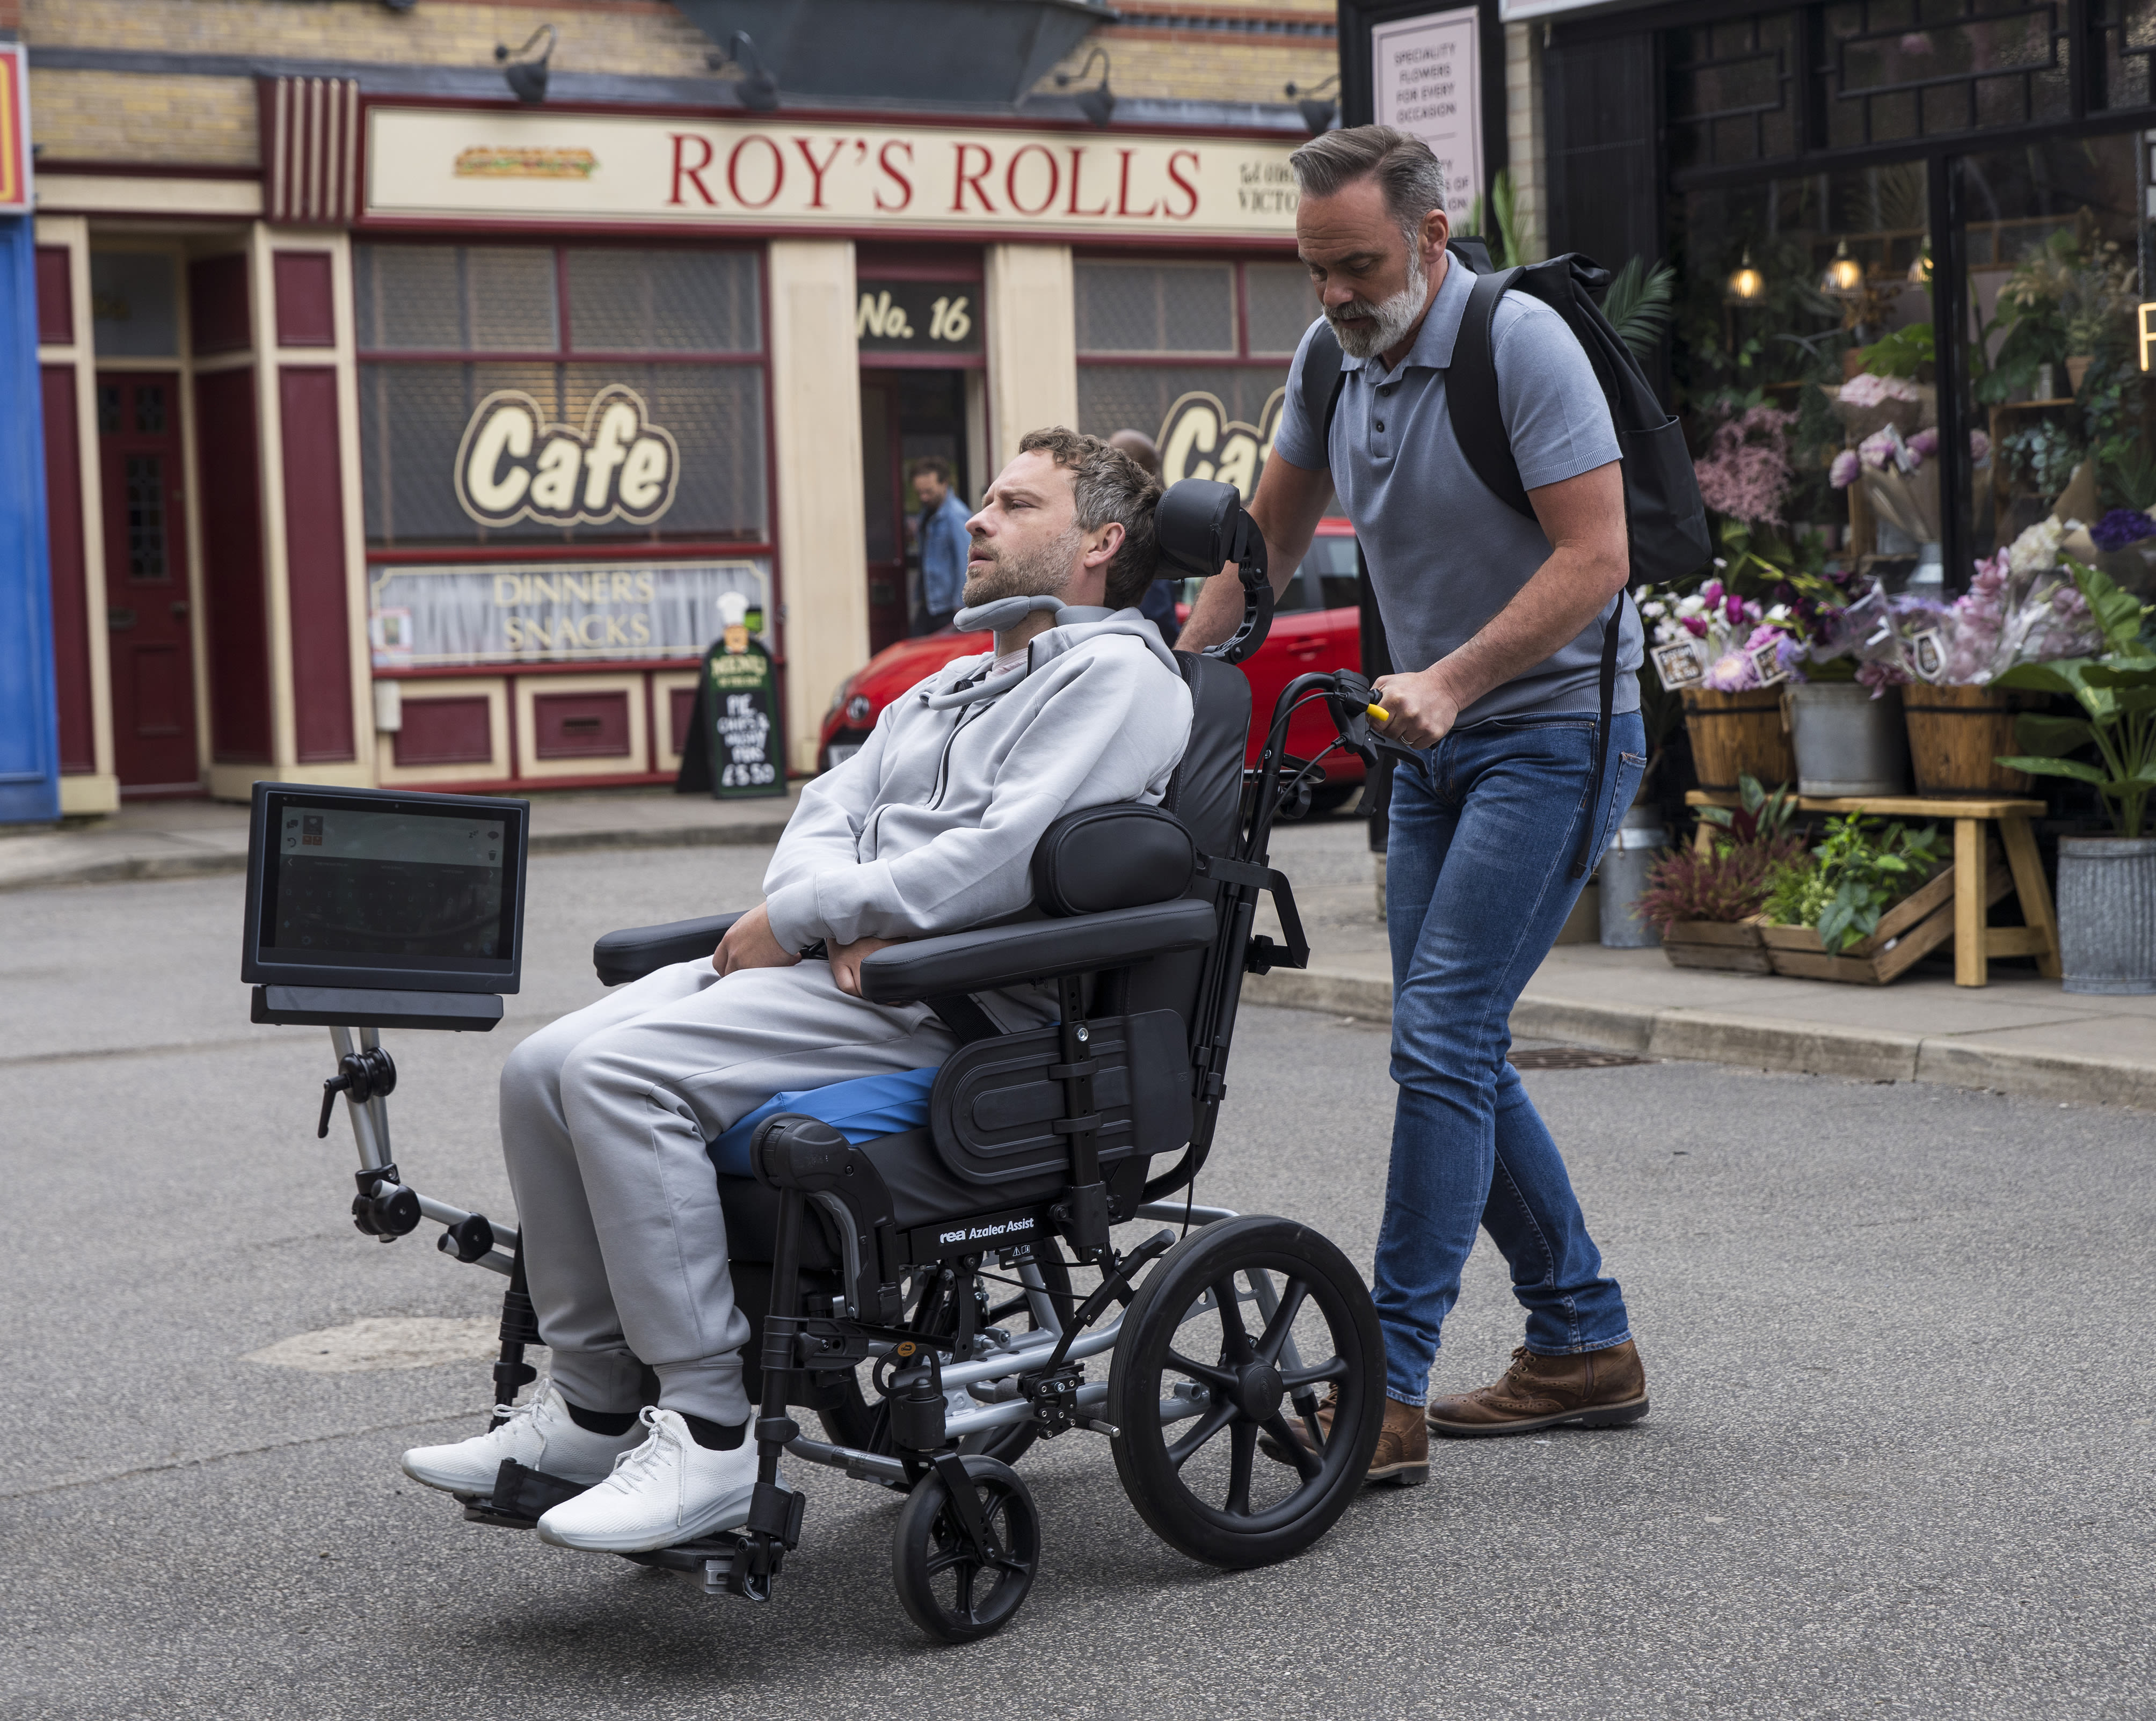 Coronation Street's Peter Ash shares an emotional message ahead of tonight's special episode